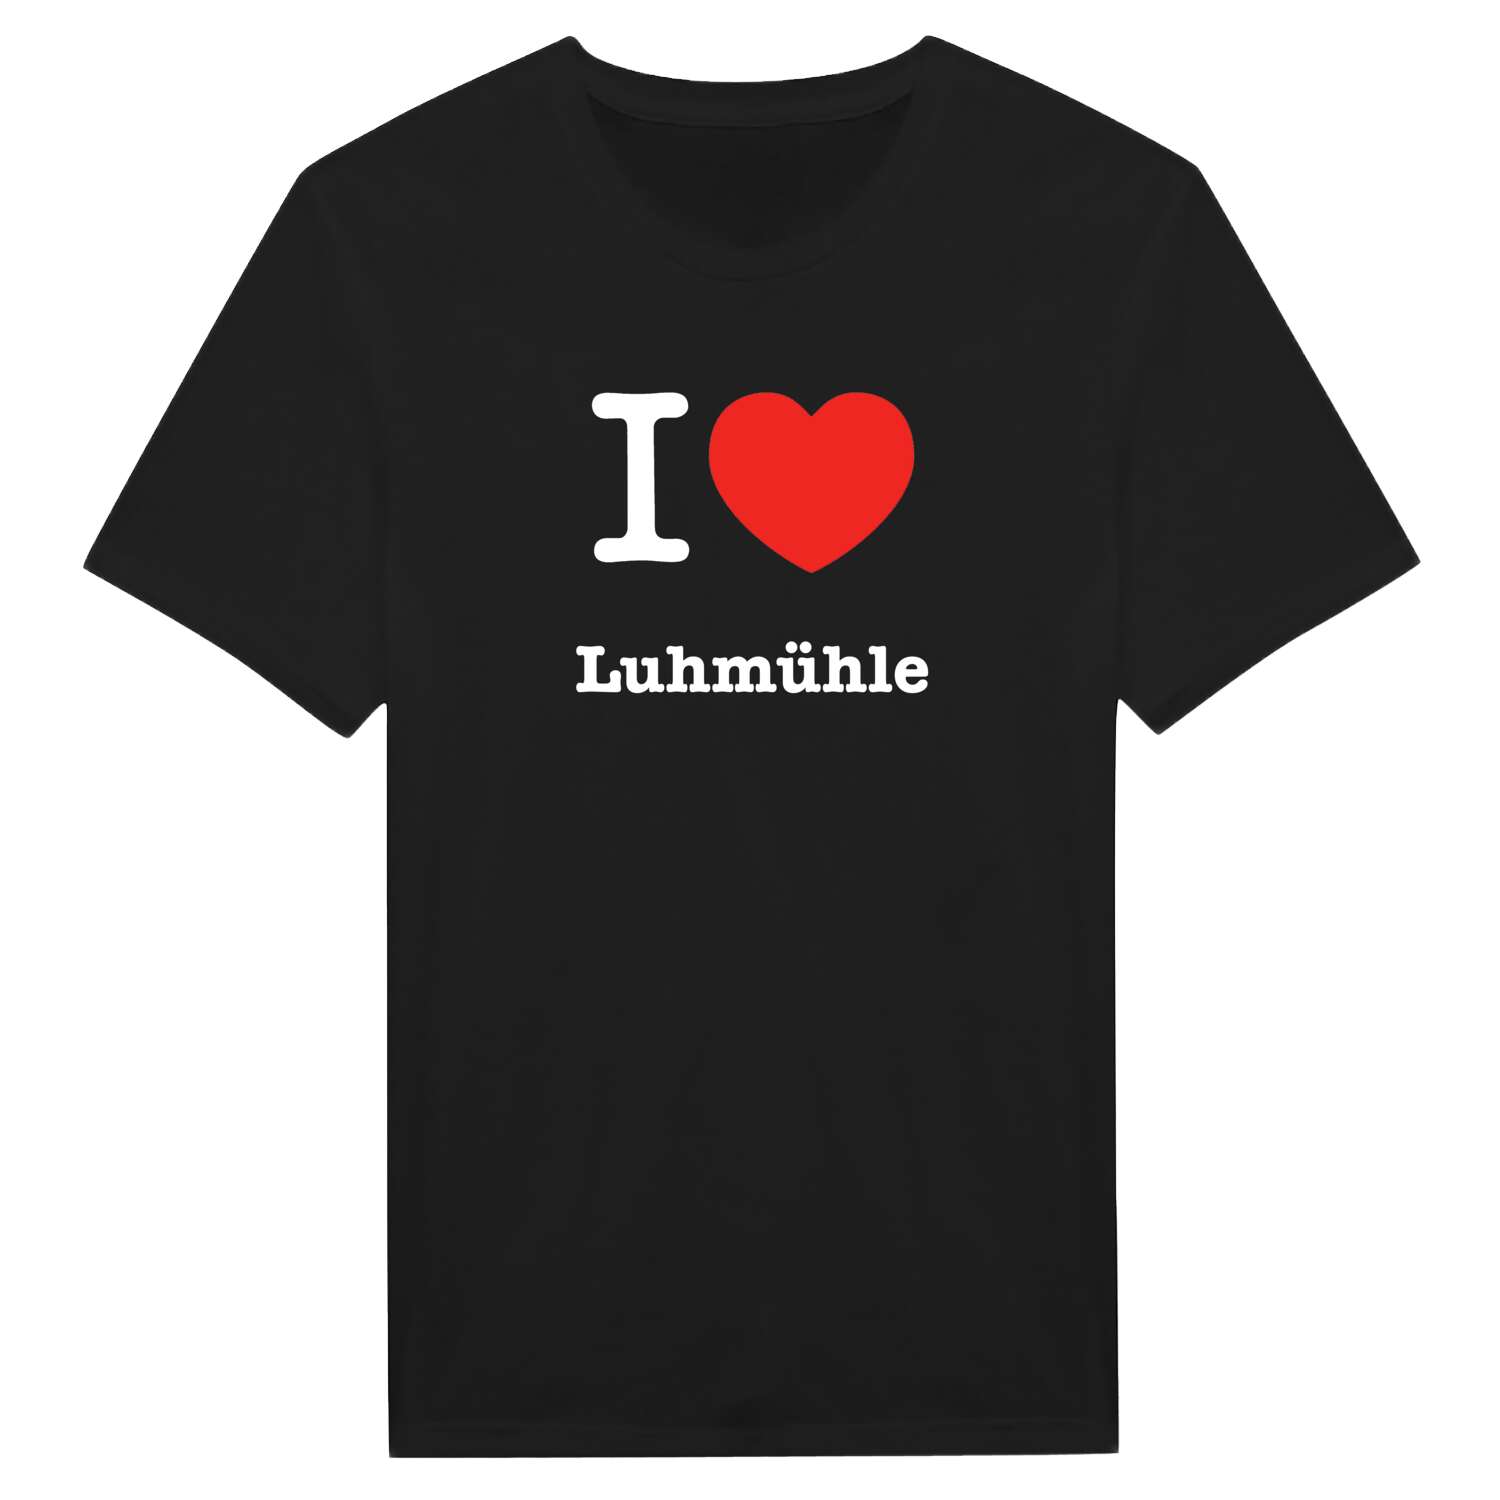 Luhmühle T-Shirt »I love«